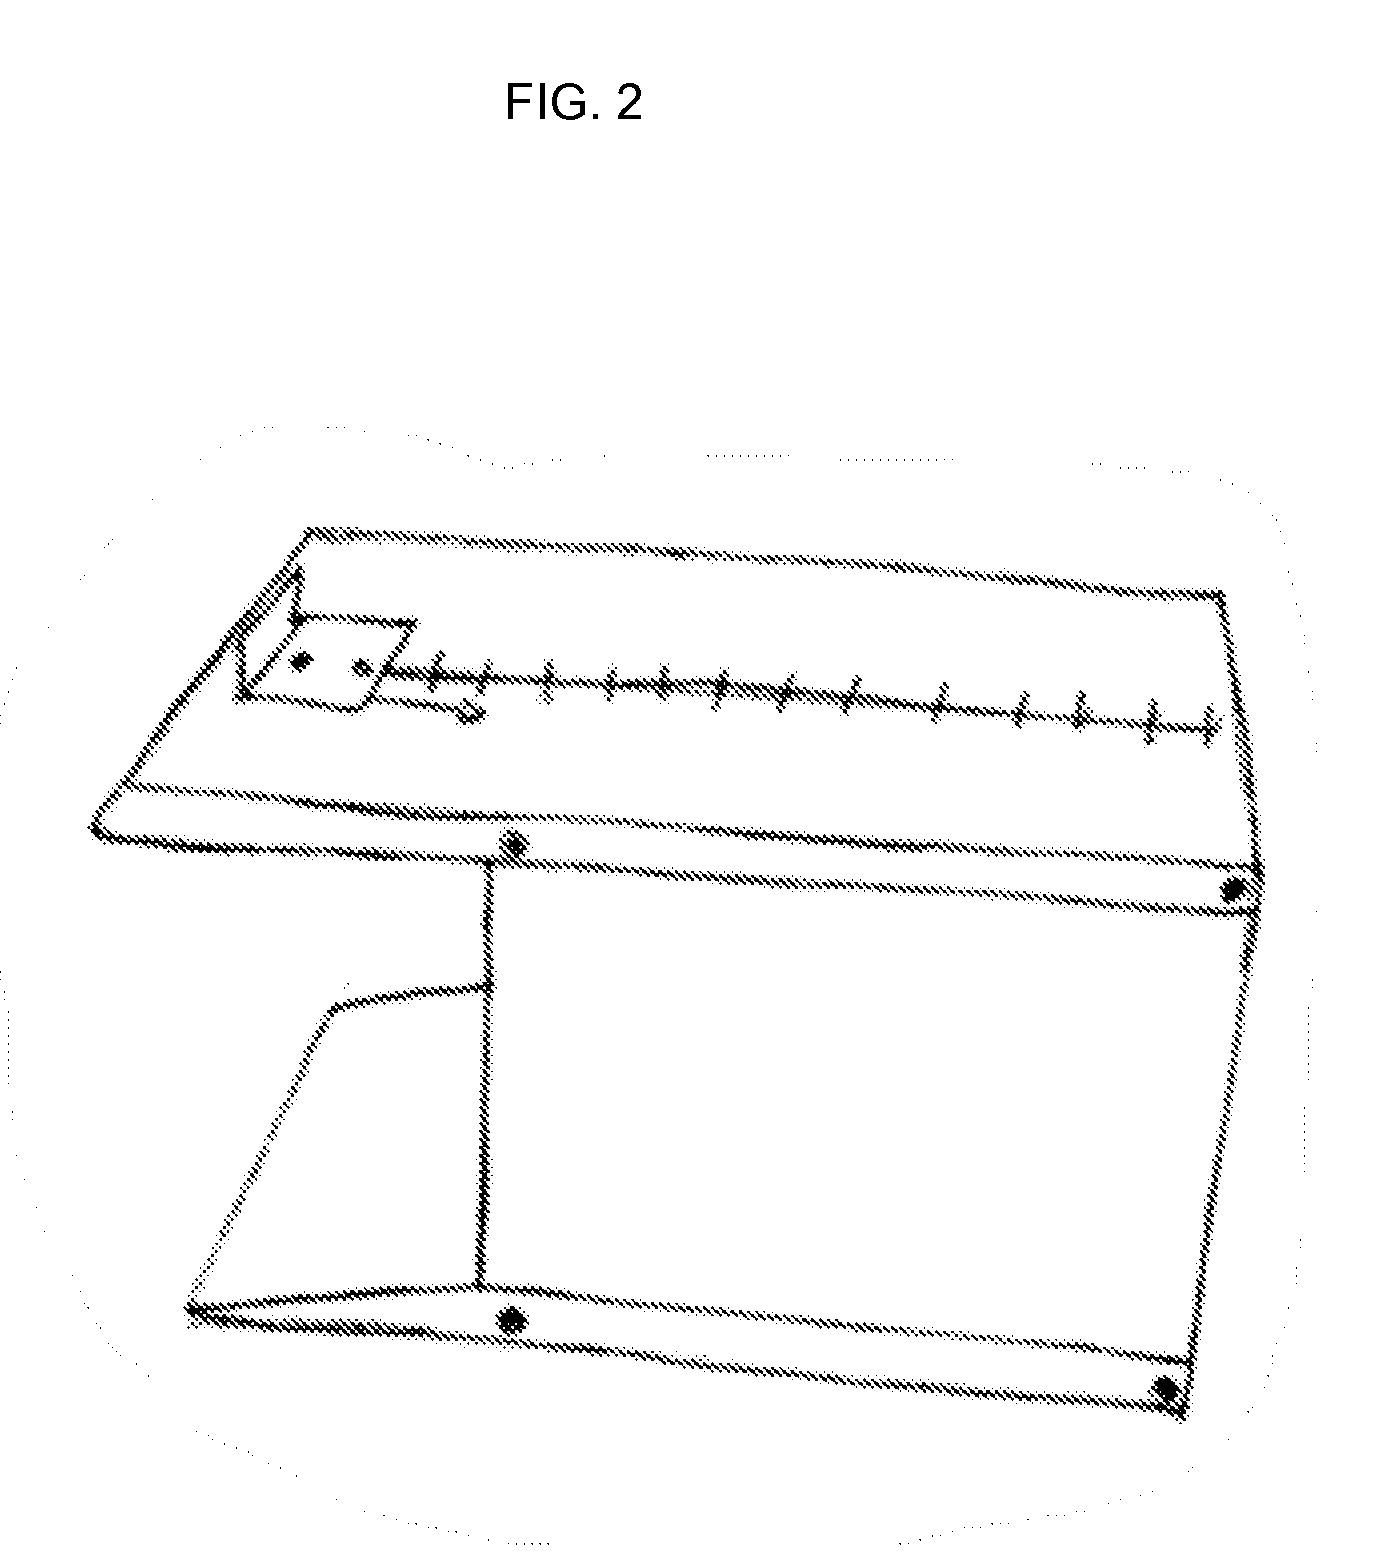 Handheld Extremity Flexibility Evaluation And Treatment Device